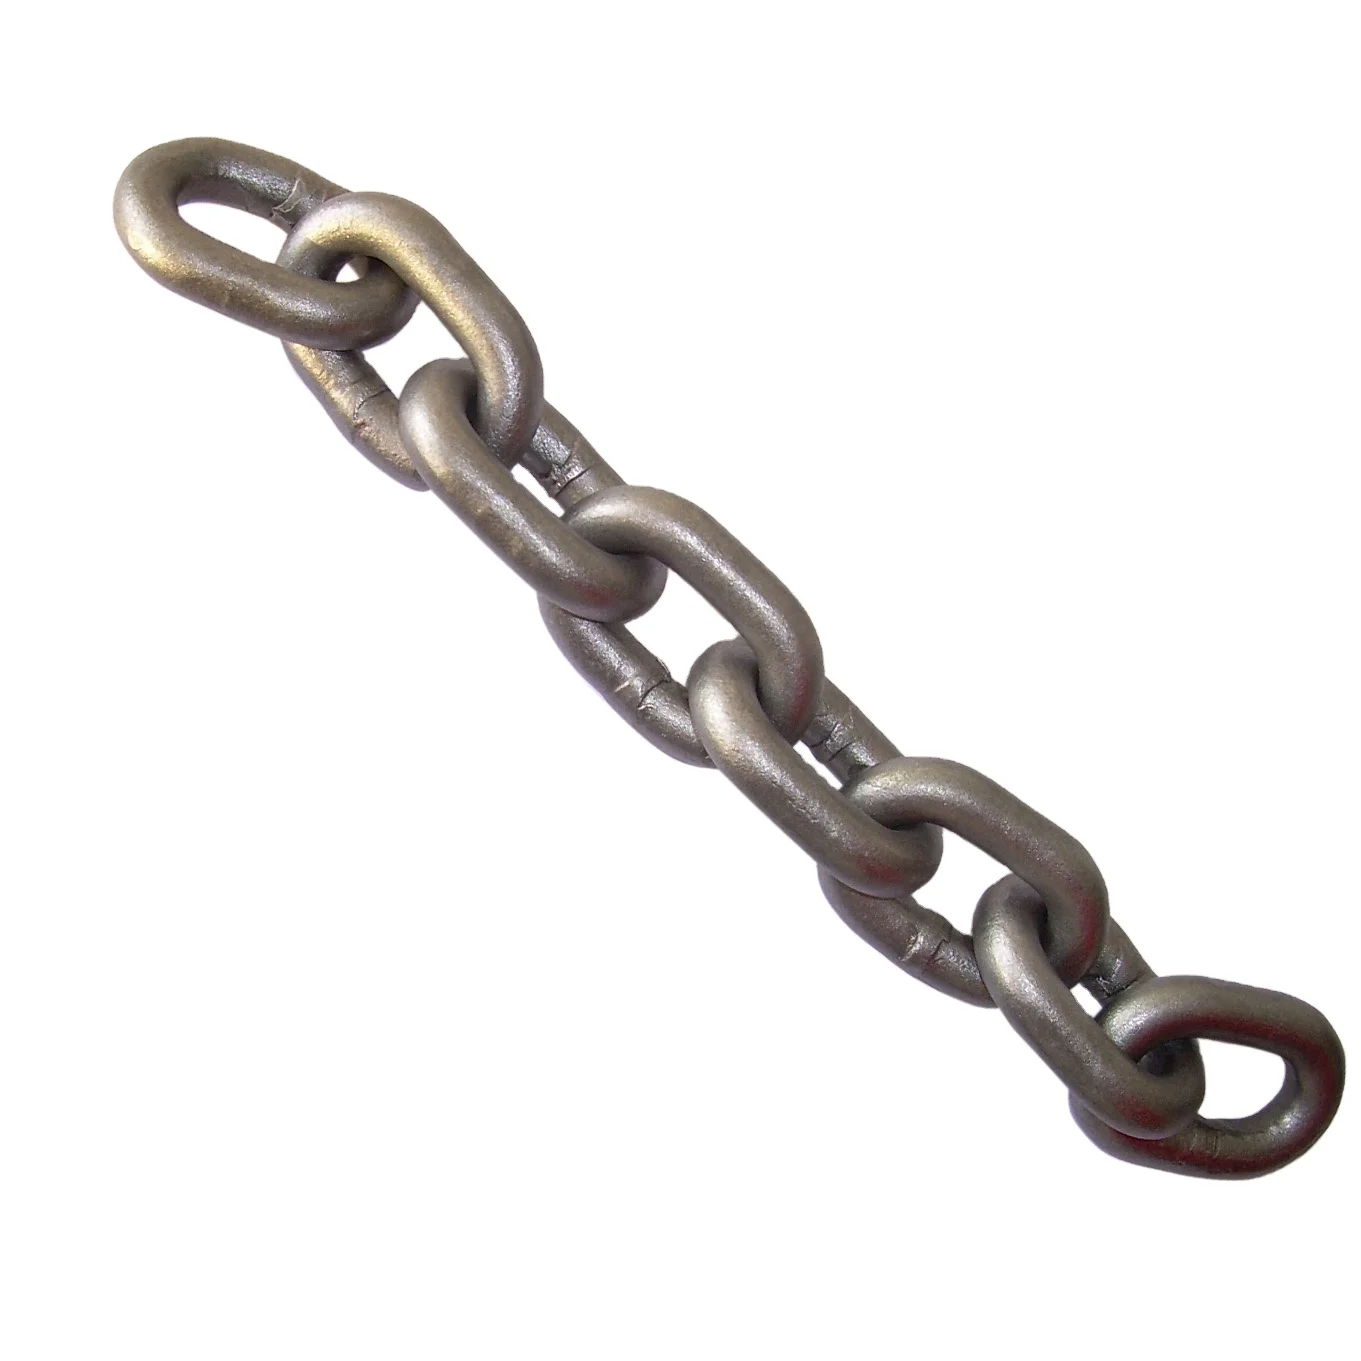 
DIN 766 763 A2 A4 304 316 Stainless steel link Chain 